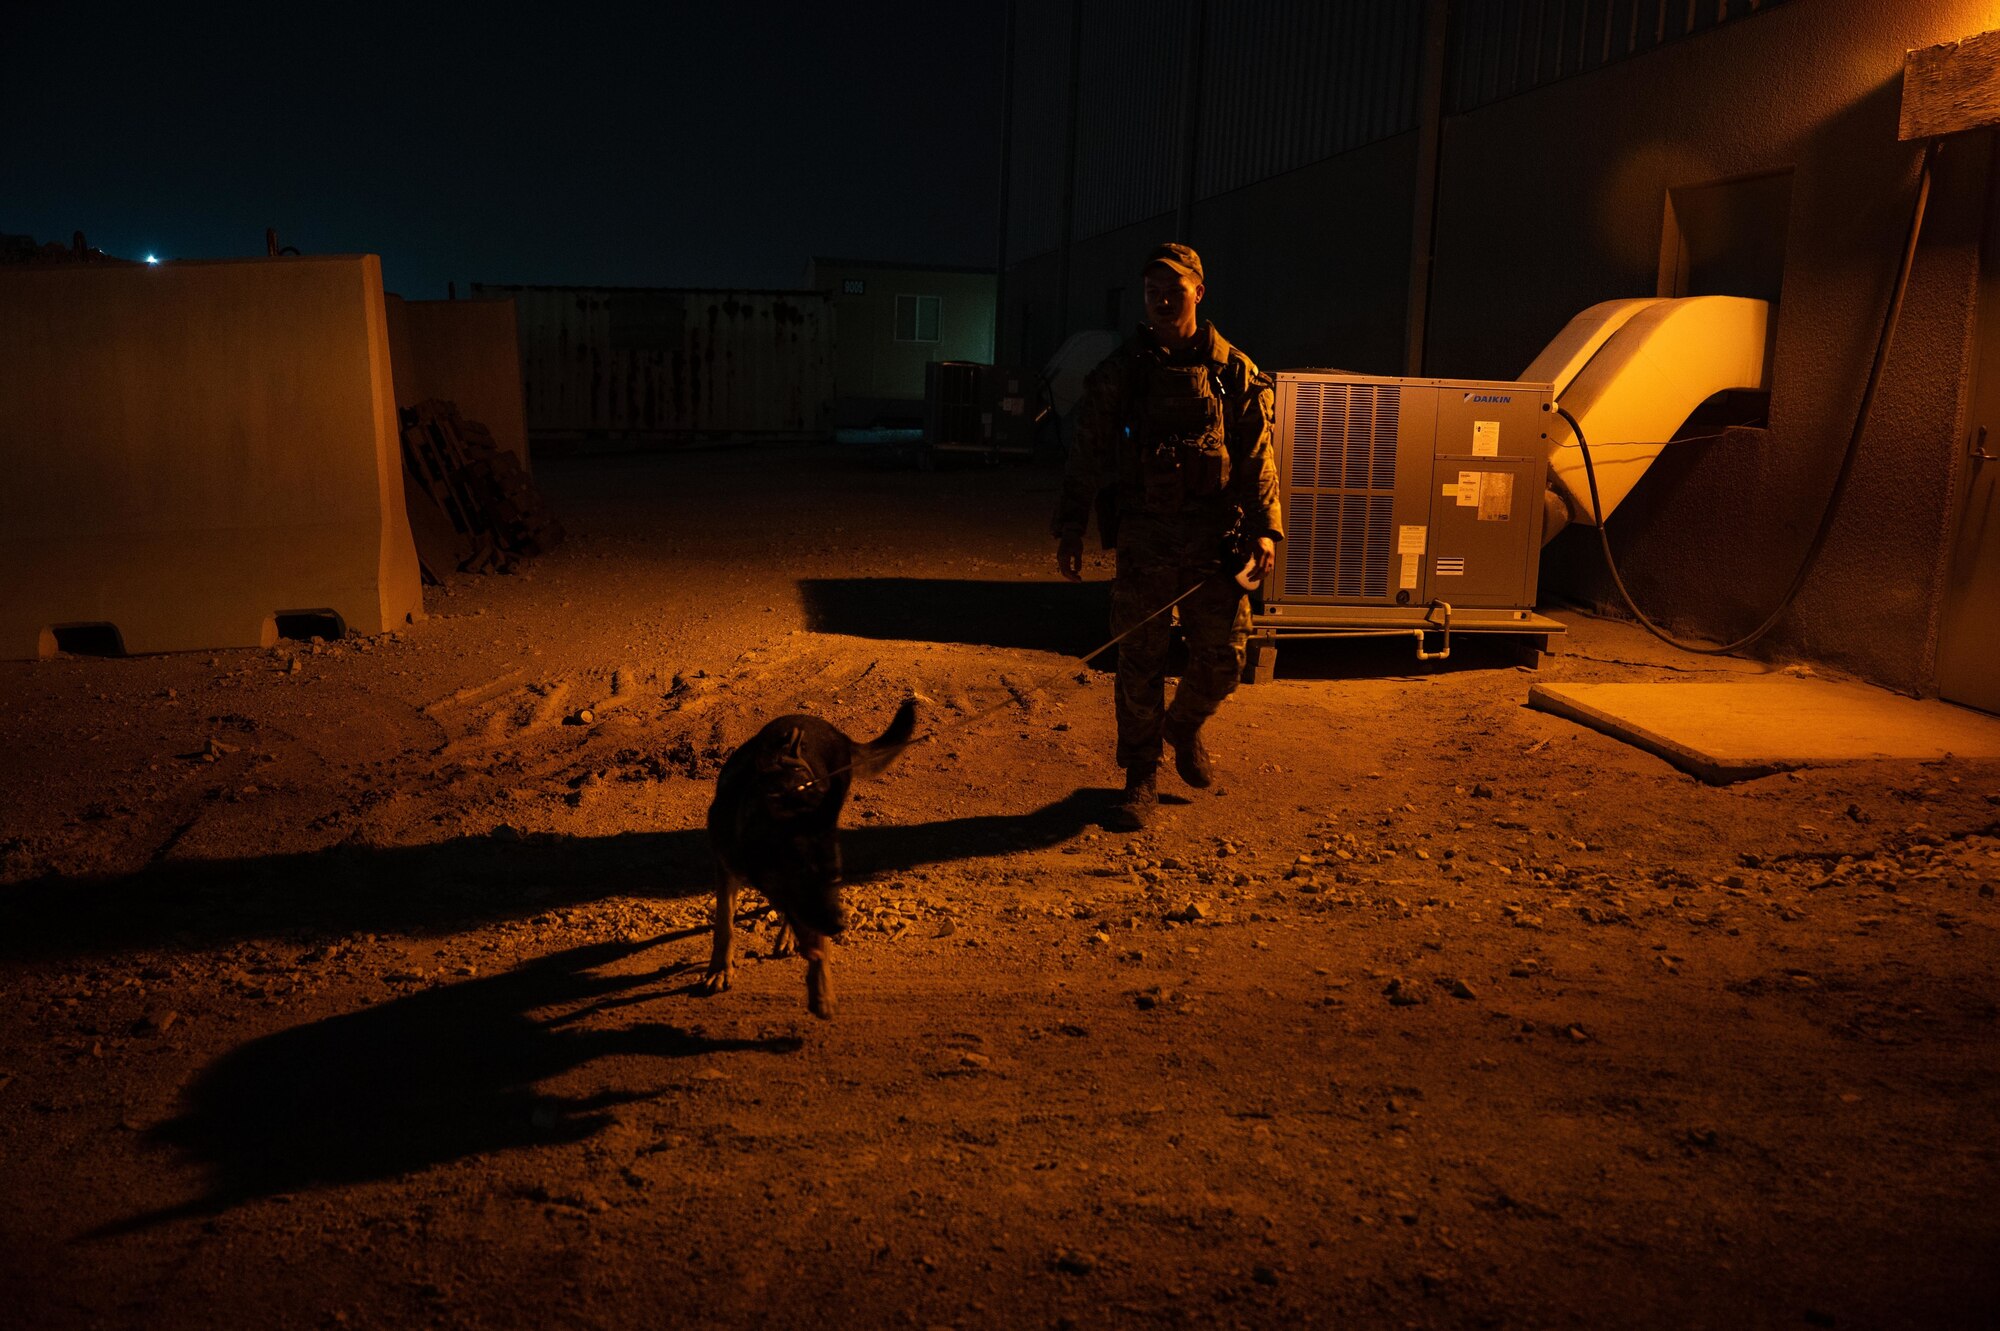 Military working dog handler, U.S. Air Force Staff Sgt. Justin Pickens of the 379th Expeditionary Security Forces Squadron, performs an evening detection patrol with his MWD around a building, at Al Udeid Air Base, Qatar, on AUG 10, 2022. Pickens has worked with five different MWD’s in his career and aspires to become a trainer someday. (U.S. Air Force photo by Staff Sgt. Dana Tourtellotte)